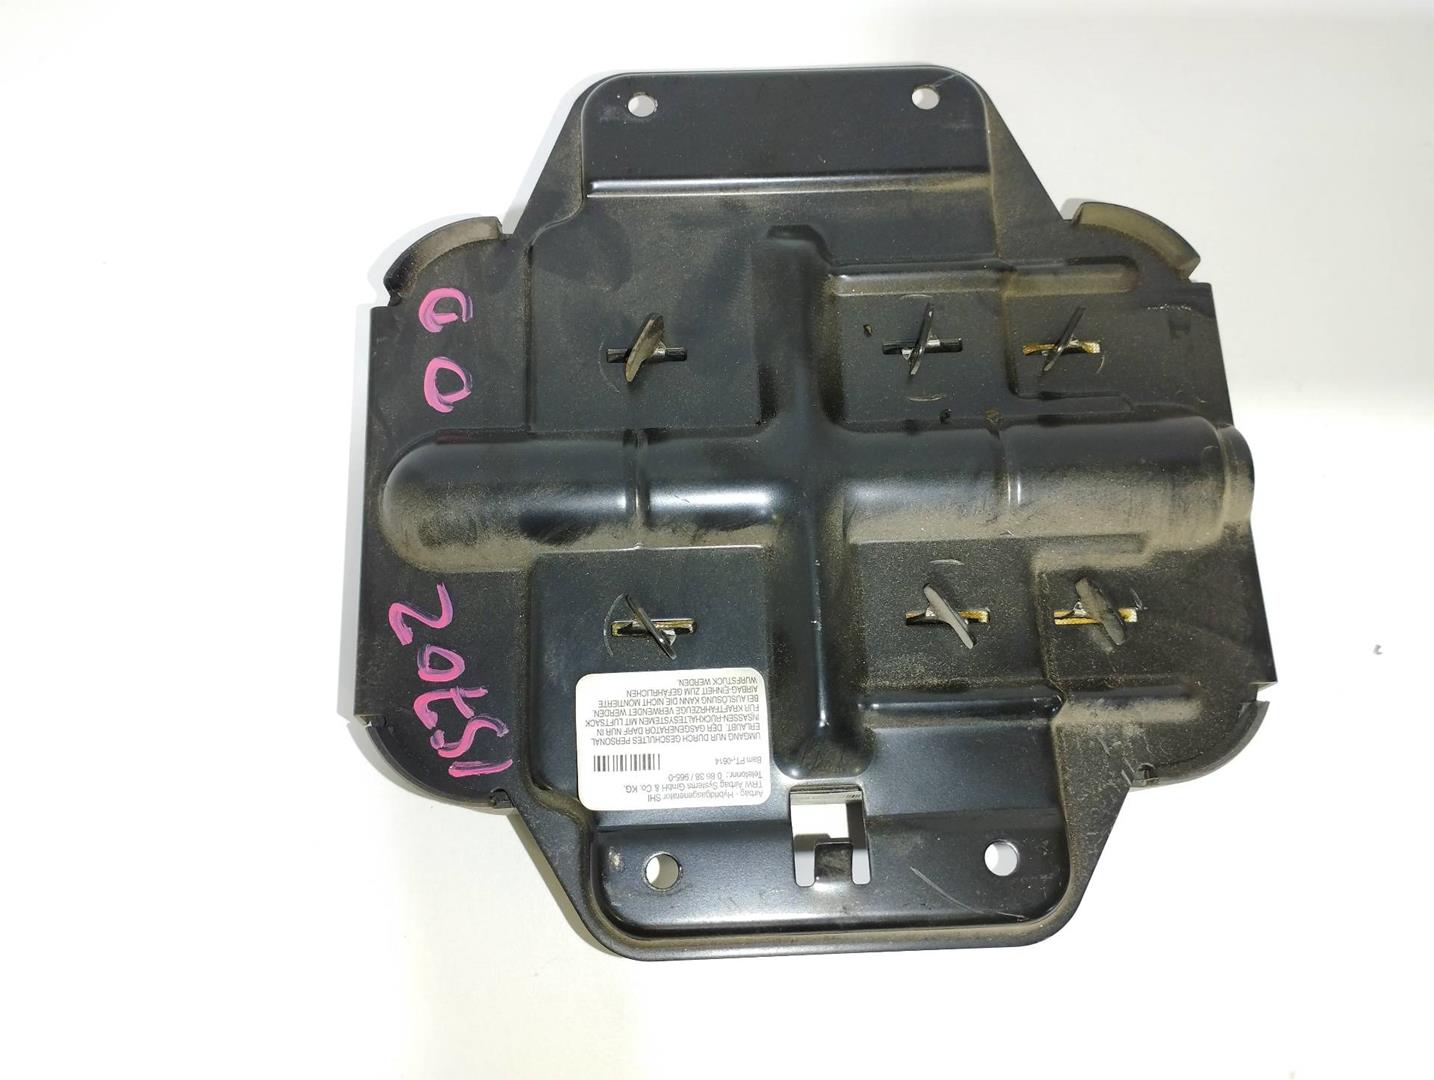 MERCEDES-BENZ M-Class W163 (1997-2005) Front Right Door Airbag SRS A1638600605 19179793